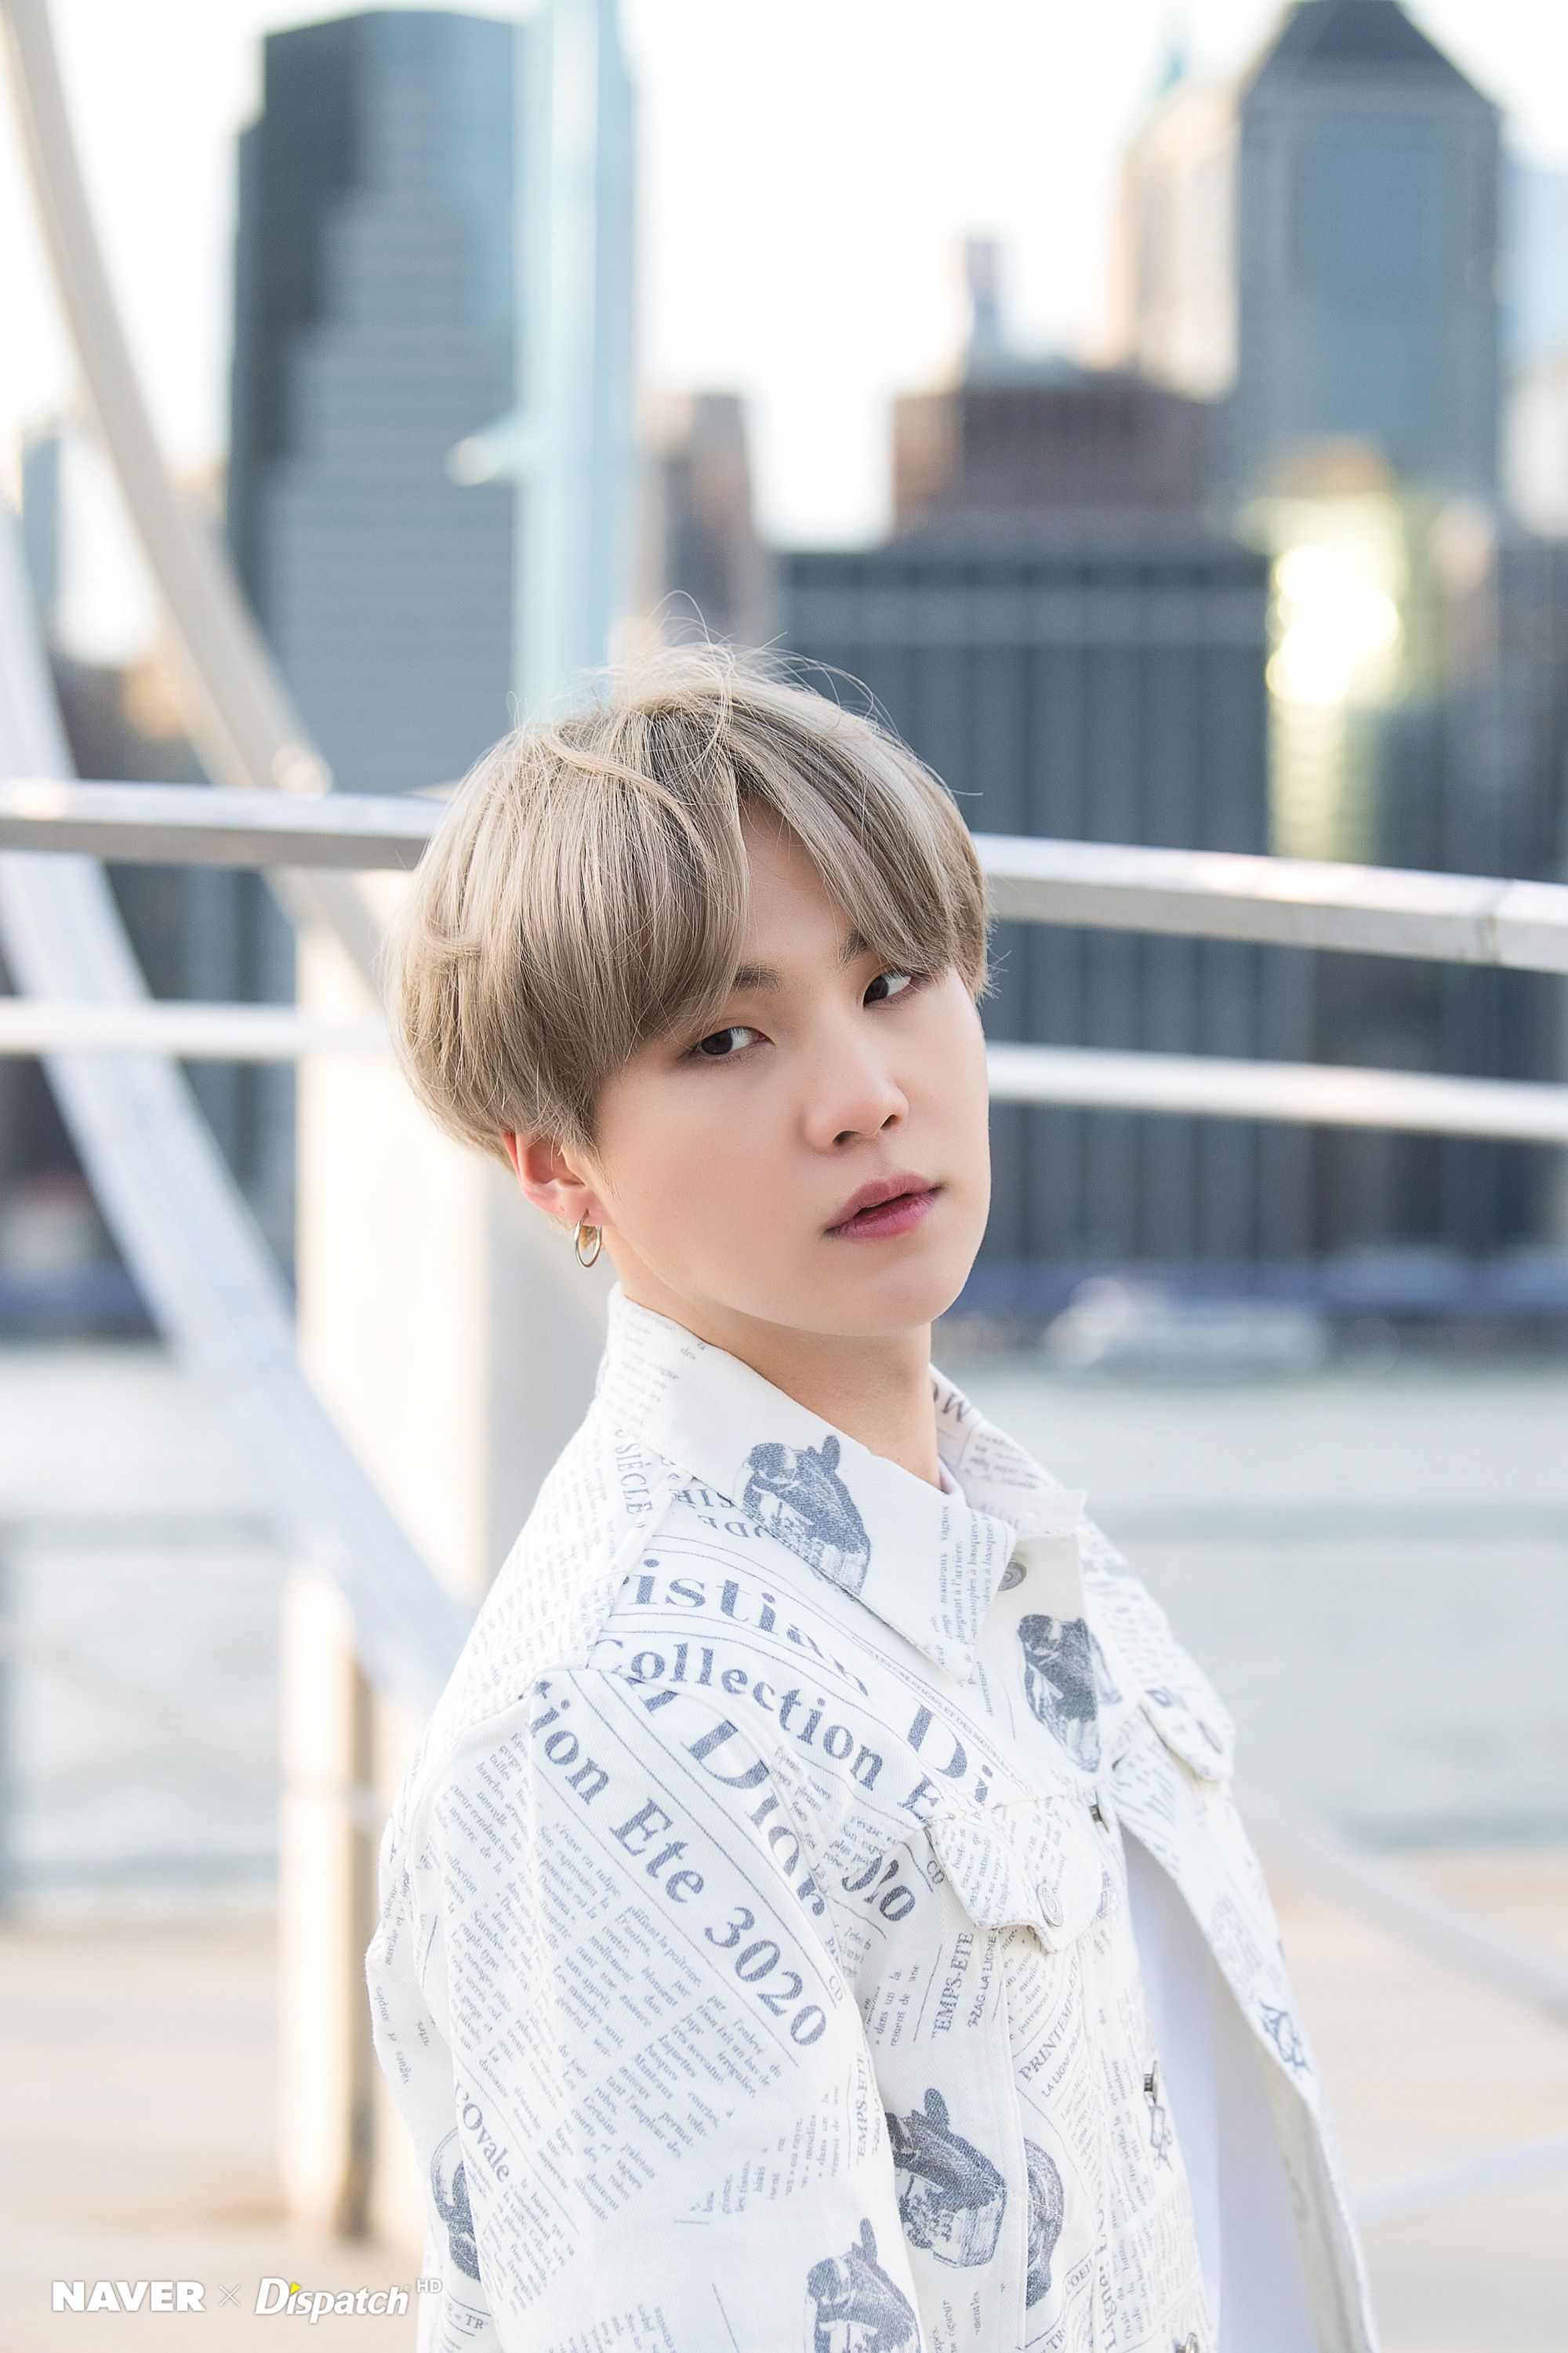 bts-suga-net-worth-2021-updated-did-the-shoulder-issue-lower-his-earnings-and-total-assets